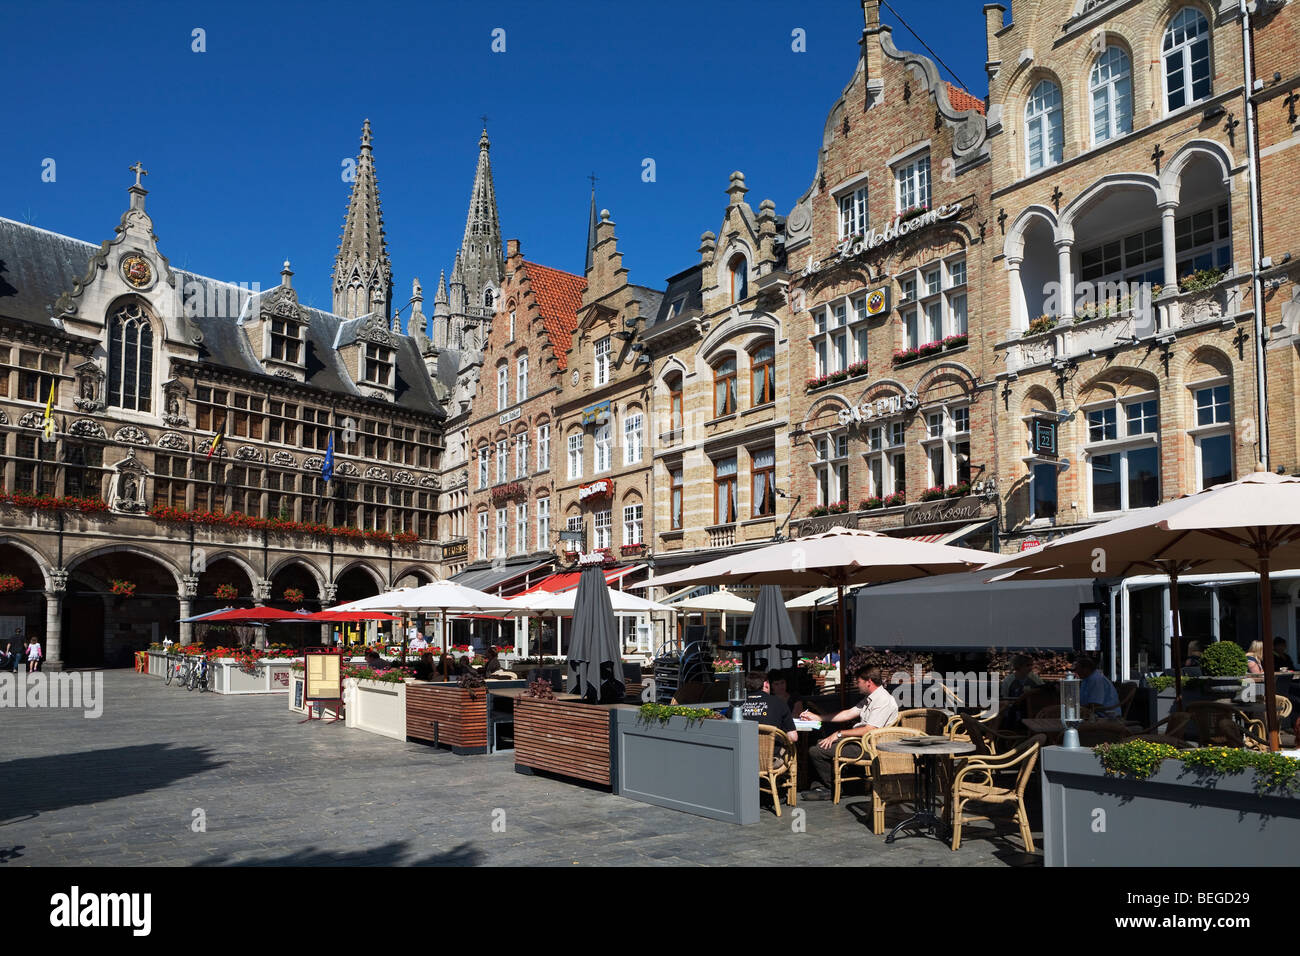 Flemish gabled buildings with restaurants in Grote Markt, next to the Cloth Halls. Stock Photo